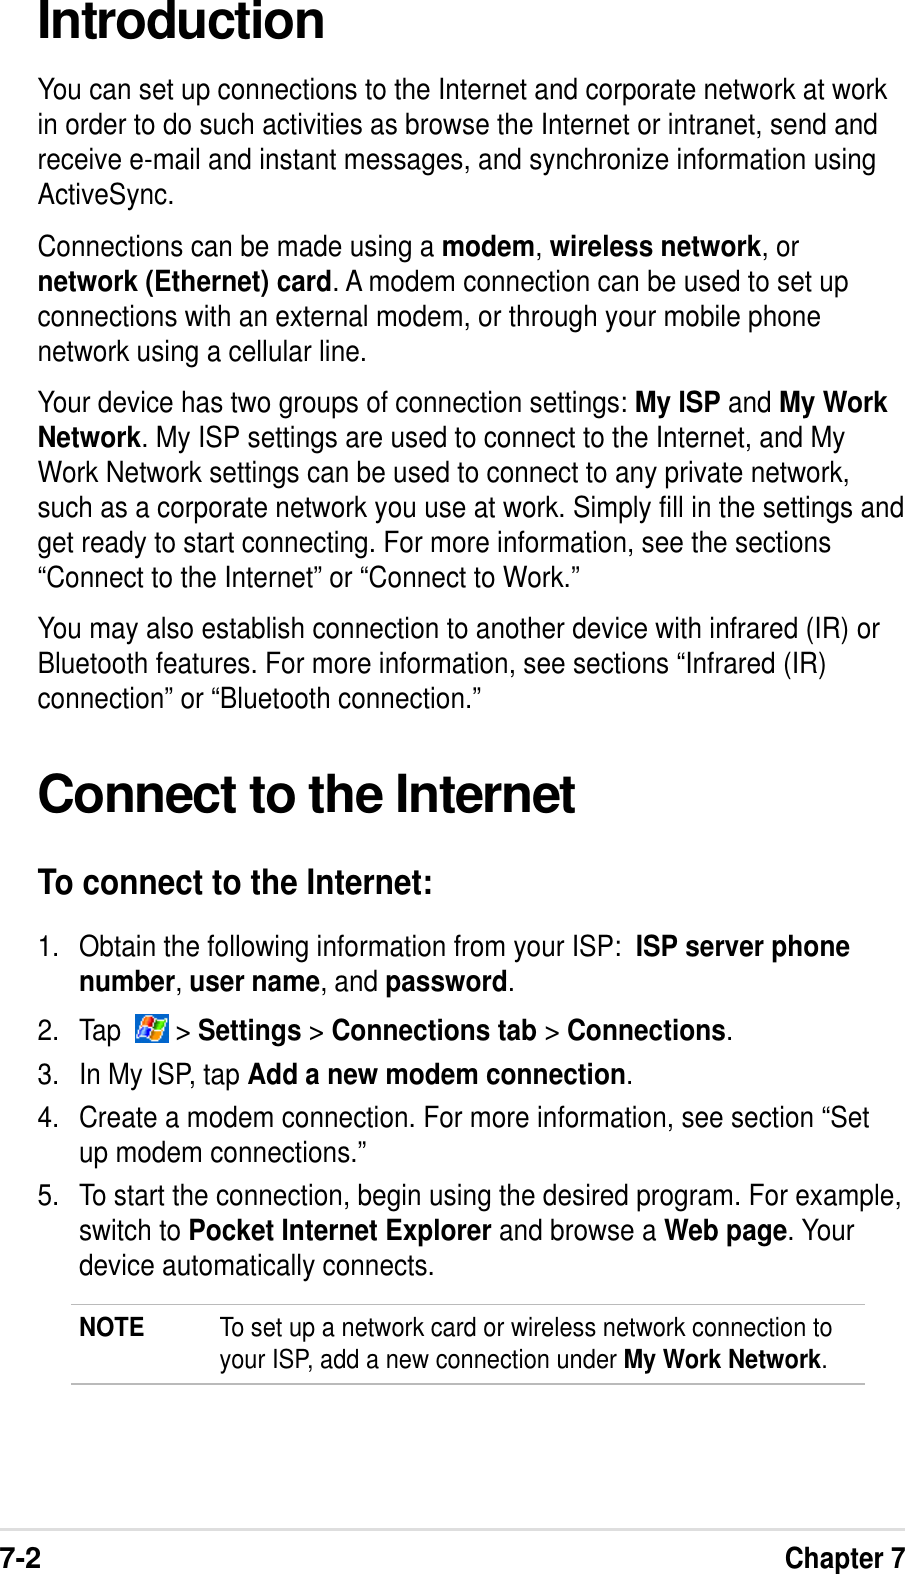 7-2Chapter 7IntroductionYou can set up connections to the Internet and corporate network at workin order to do such activities as browse the Internet or intranet, send andreceive e-mail and instant messages, and synchronize information usingActiveSync.Connections can be made using a modem, wireless network, ornetwork (Ethernet) card. A modem connection can be used to set upconnections with an external modem, or through your mobile phonenetwork using a cellular line.Your device has two groups of connection settings: My ISP and My WorkNetwork. My ISP settings are used to connect to the Internet, and MyWork Network settings can be used to connect to any private network,such as a corporate network you use at work. Simply fill in the settings andget ready to start connecting. For more information, see the sections“Connect to the Internet” or “Connect to Work.”You may also establish connection to another device with infrared (IR) orBluetooth features. For more information, see sections “Infrared (IR)connection” or “Bluetooth connection.”Connect to the InternetTo connect to the Internet:1. Obtain the following information from your ISP:  ISP server phonenumber, user name, and password.2. Tap    &gt; Settings &gt; Connections tab &gt; Connections.3. In My ISP, tap Add a new modem connection.4. Create a modem connection. For more information, see section “Setup modem connections.”5. To start the connection, begin using the desired program. For example,switch to Pocket Internet Explorer and browse a Web page. Yourdevice automatically connects.NOTE To set up a network card or wireless network connection toyour ISP, add a new connection under My Work Network.